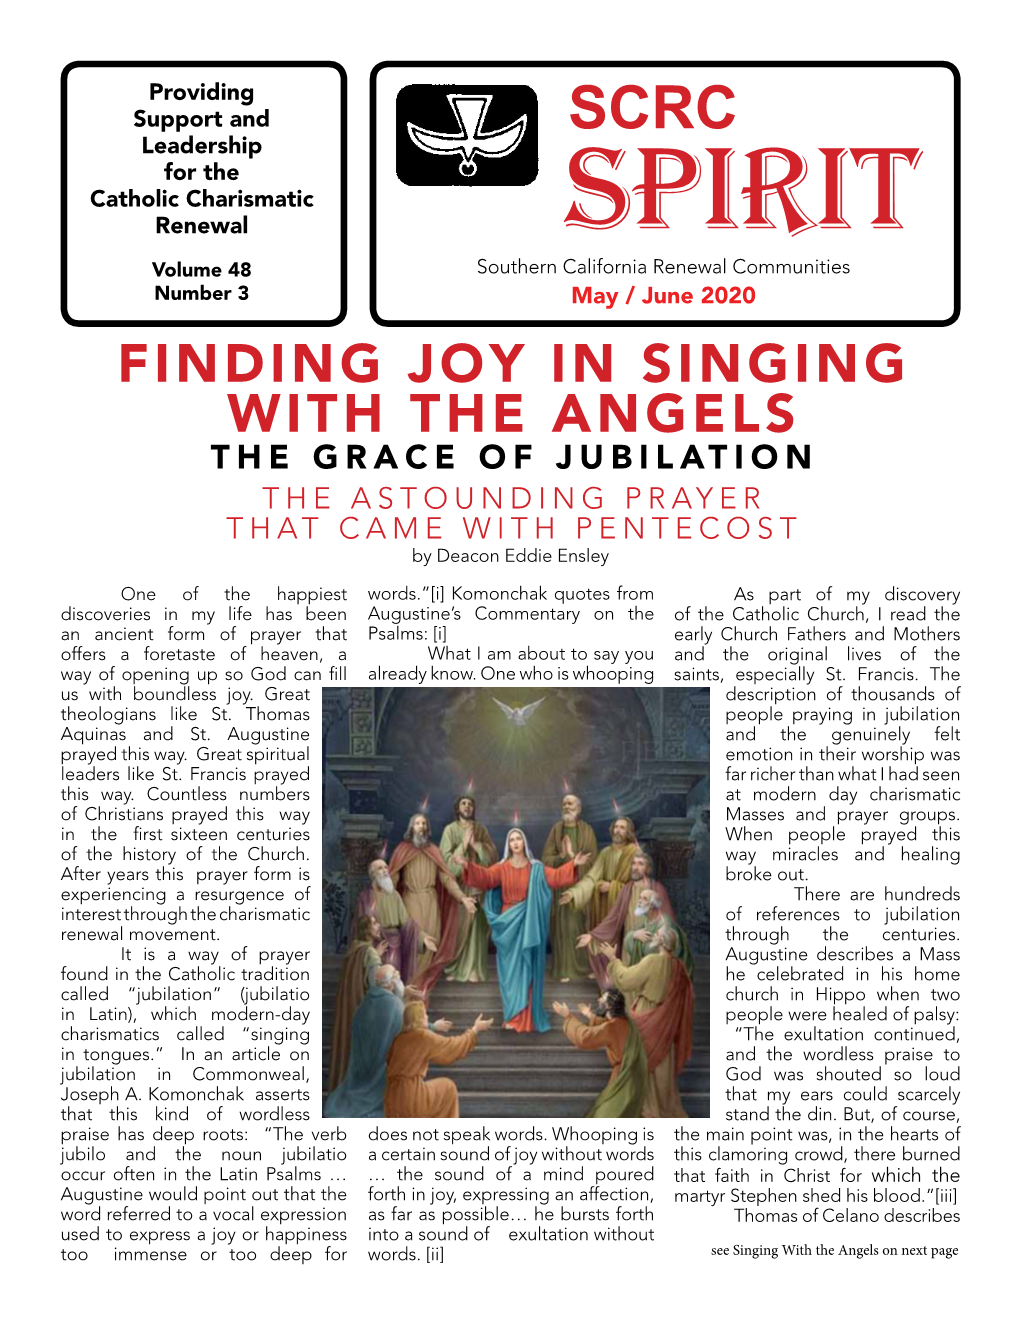 FINDING JOY in SINGING with the ANGELS the GRACE of JUBILATION the ASTOUNDING PRAYER THAT CAME with PENTECOST by Deacon Eddie Ensley